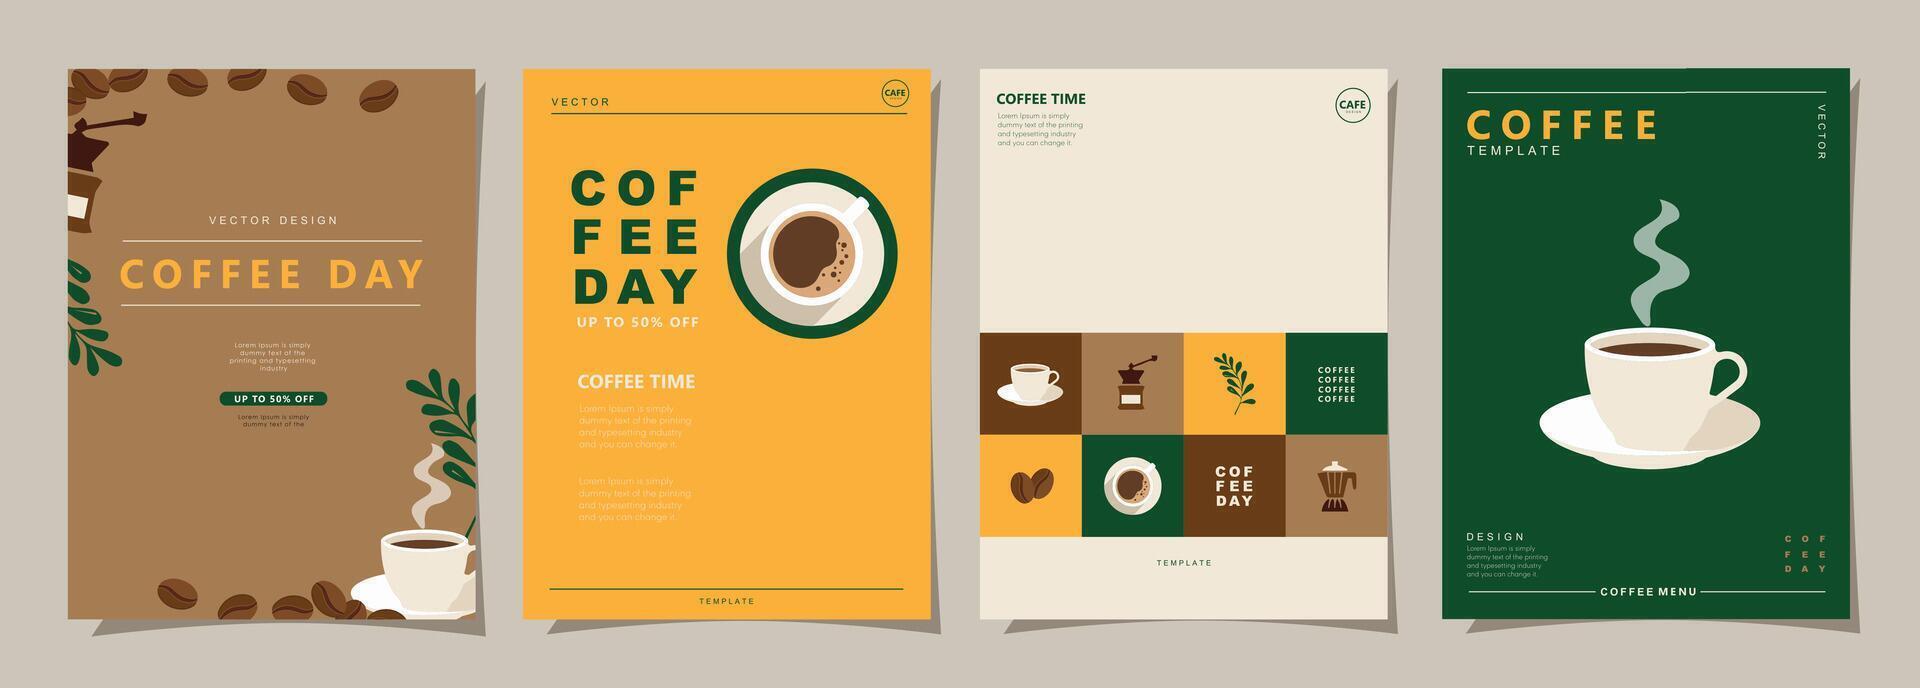 Set of minimal background templates with coffee beans and coffee mug for invitations, cards, banner, brochure, poster, cover, cafe menu or another design. vector